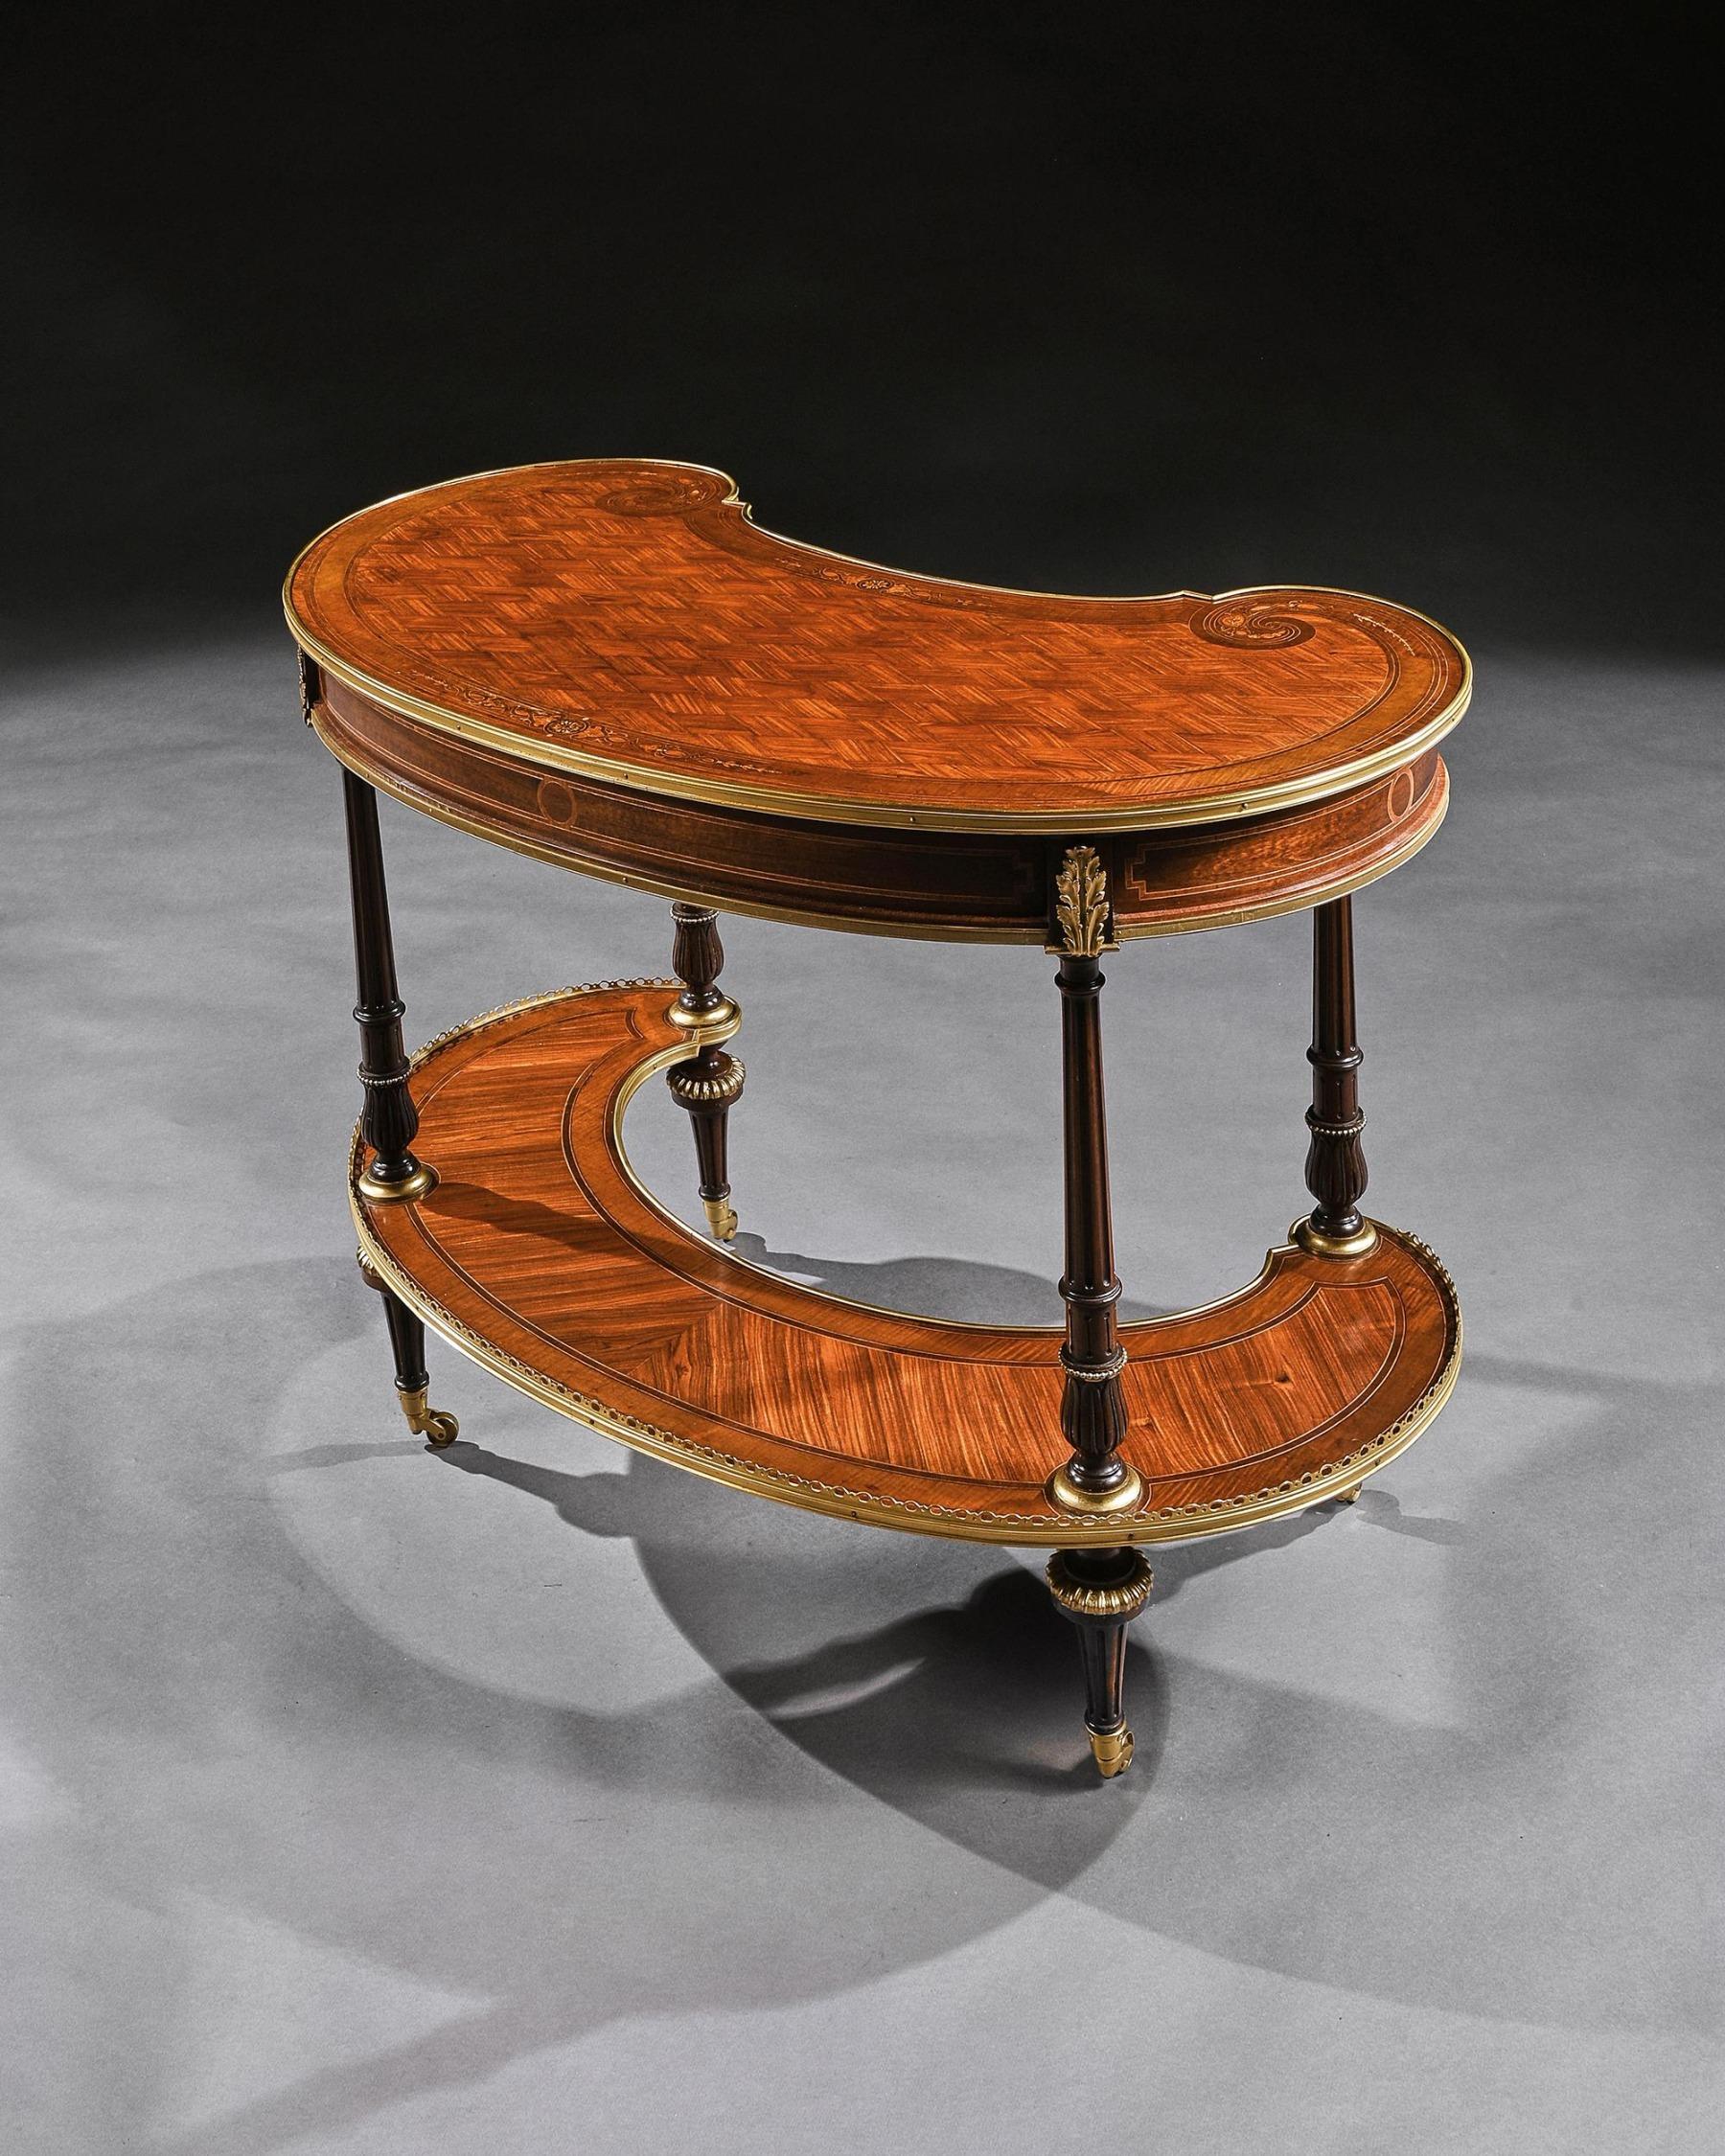 Fine 19th Century Gillows Parquetry and Gilt Bronze Kidney Shaped Table For Sale 1